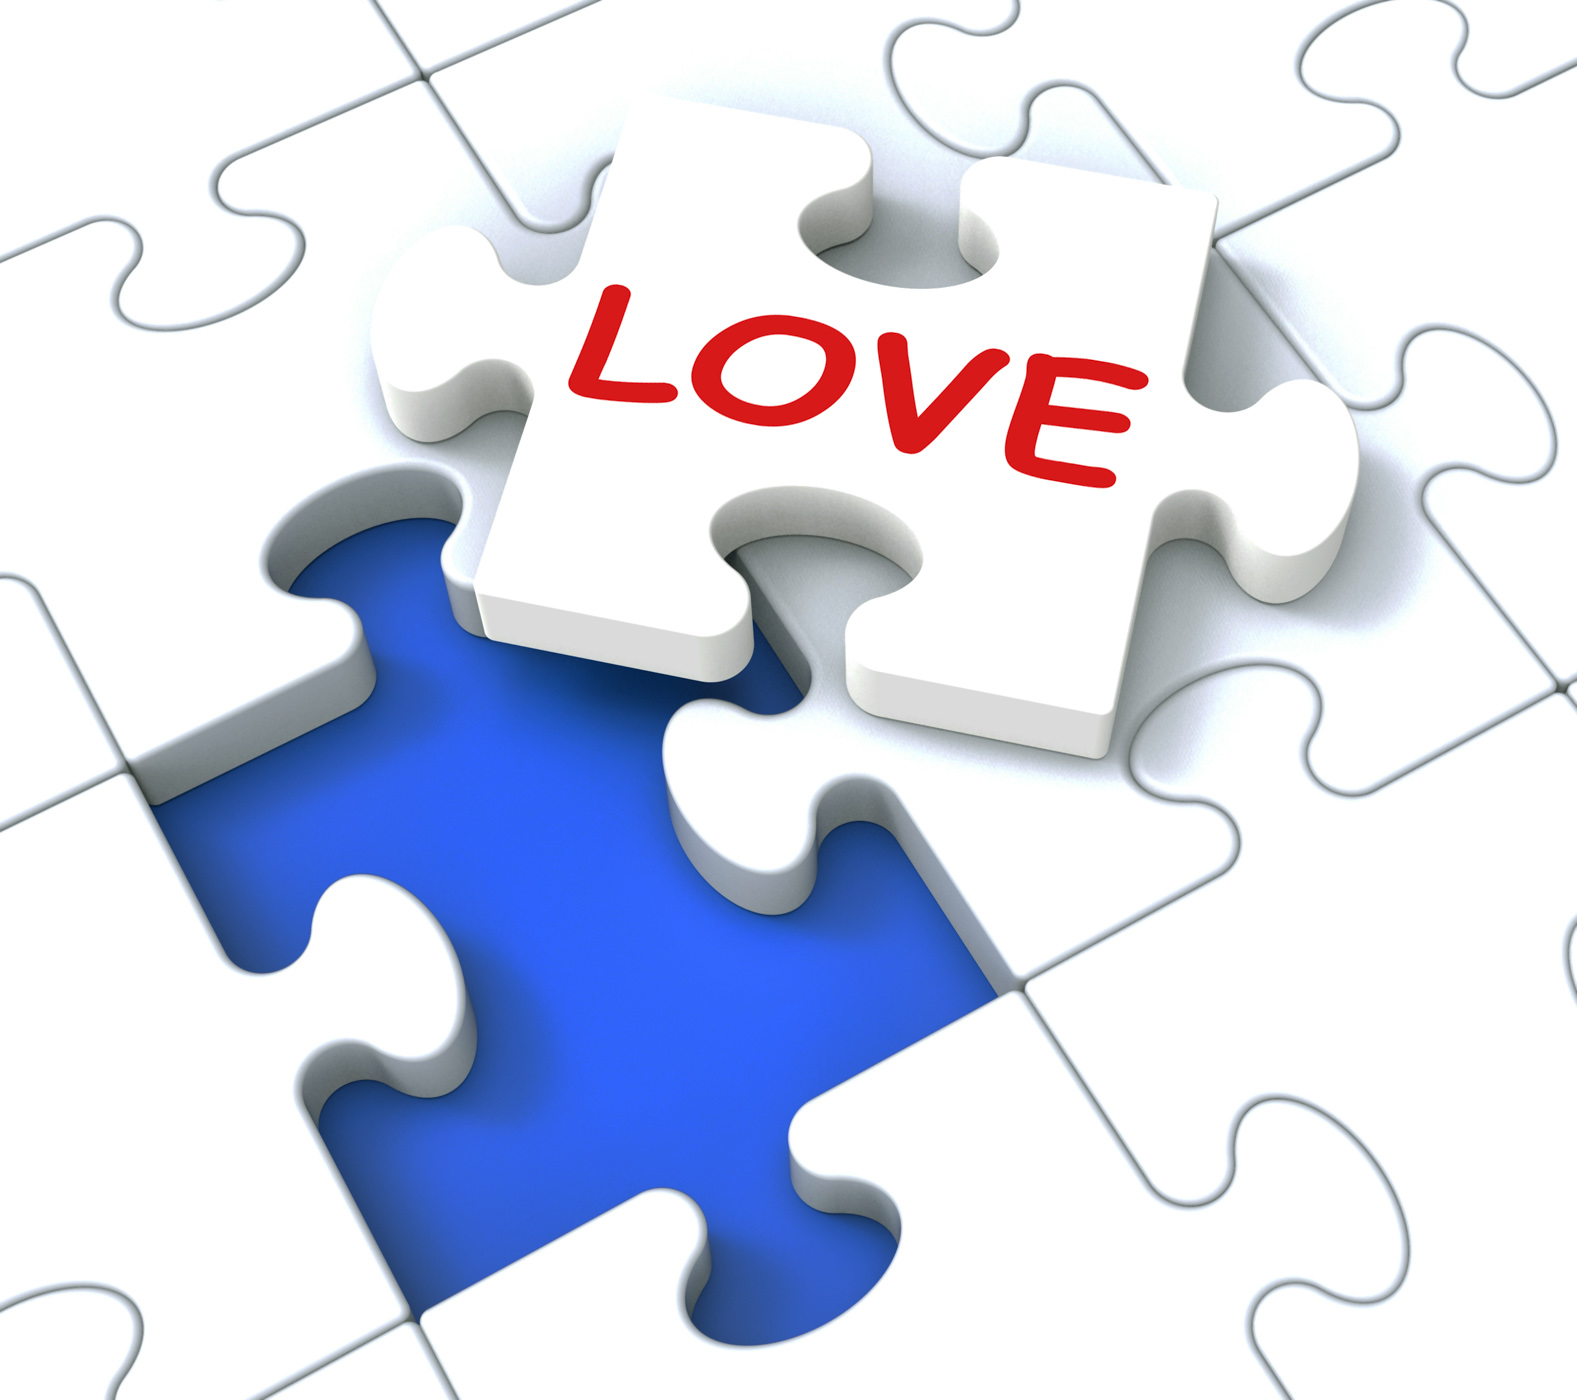 Love puzzle shows loving couples photo